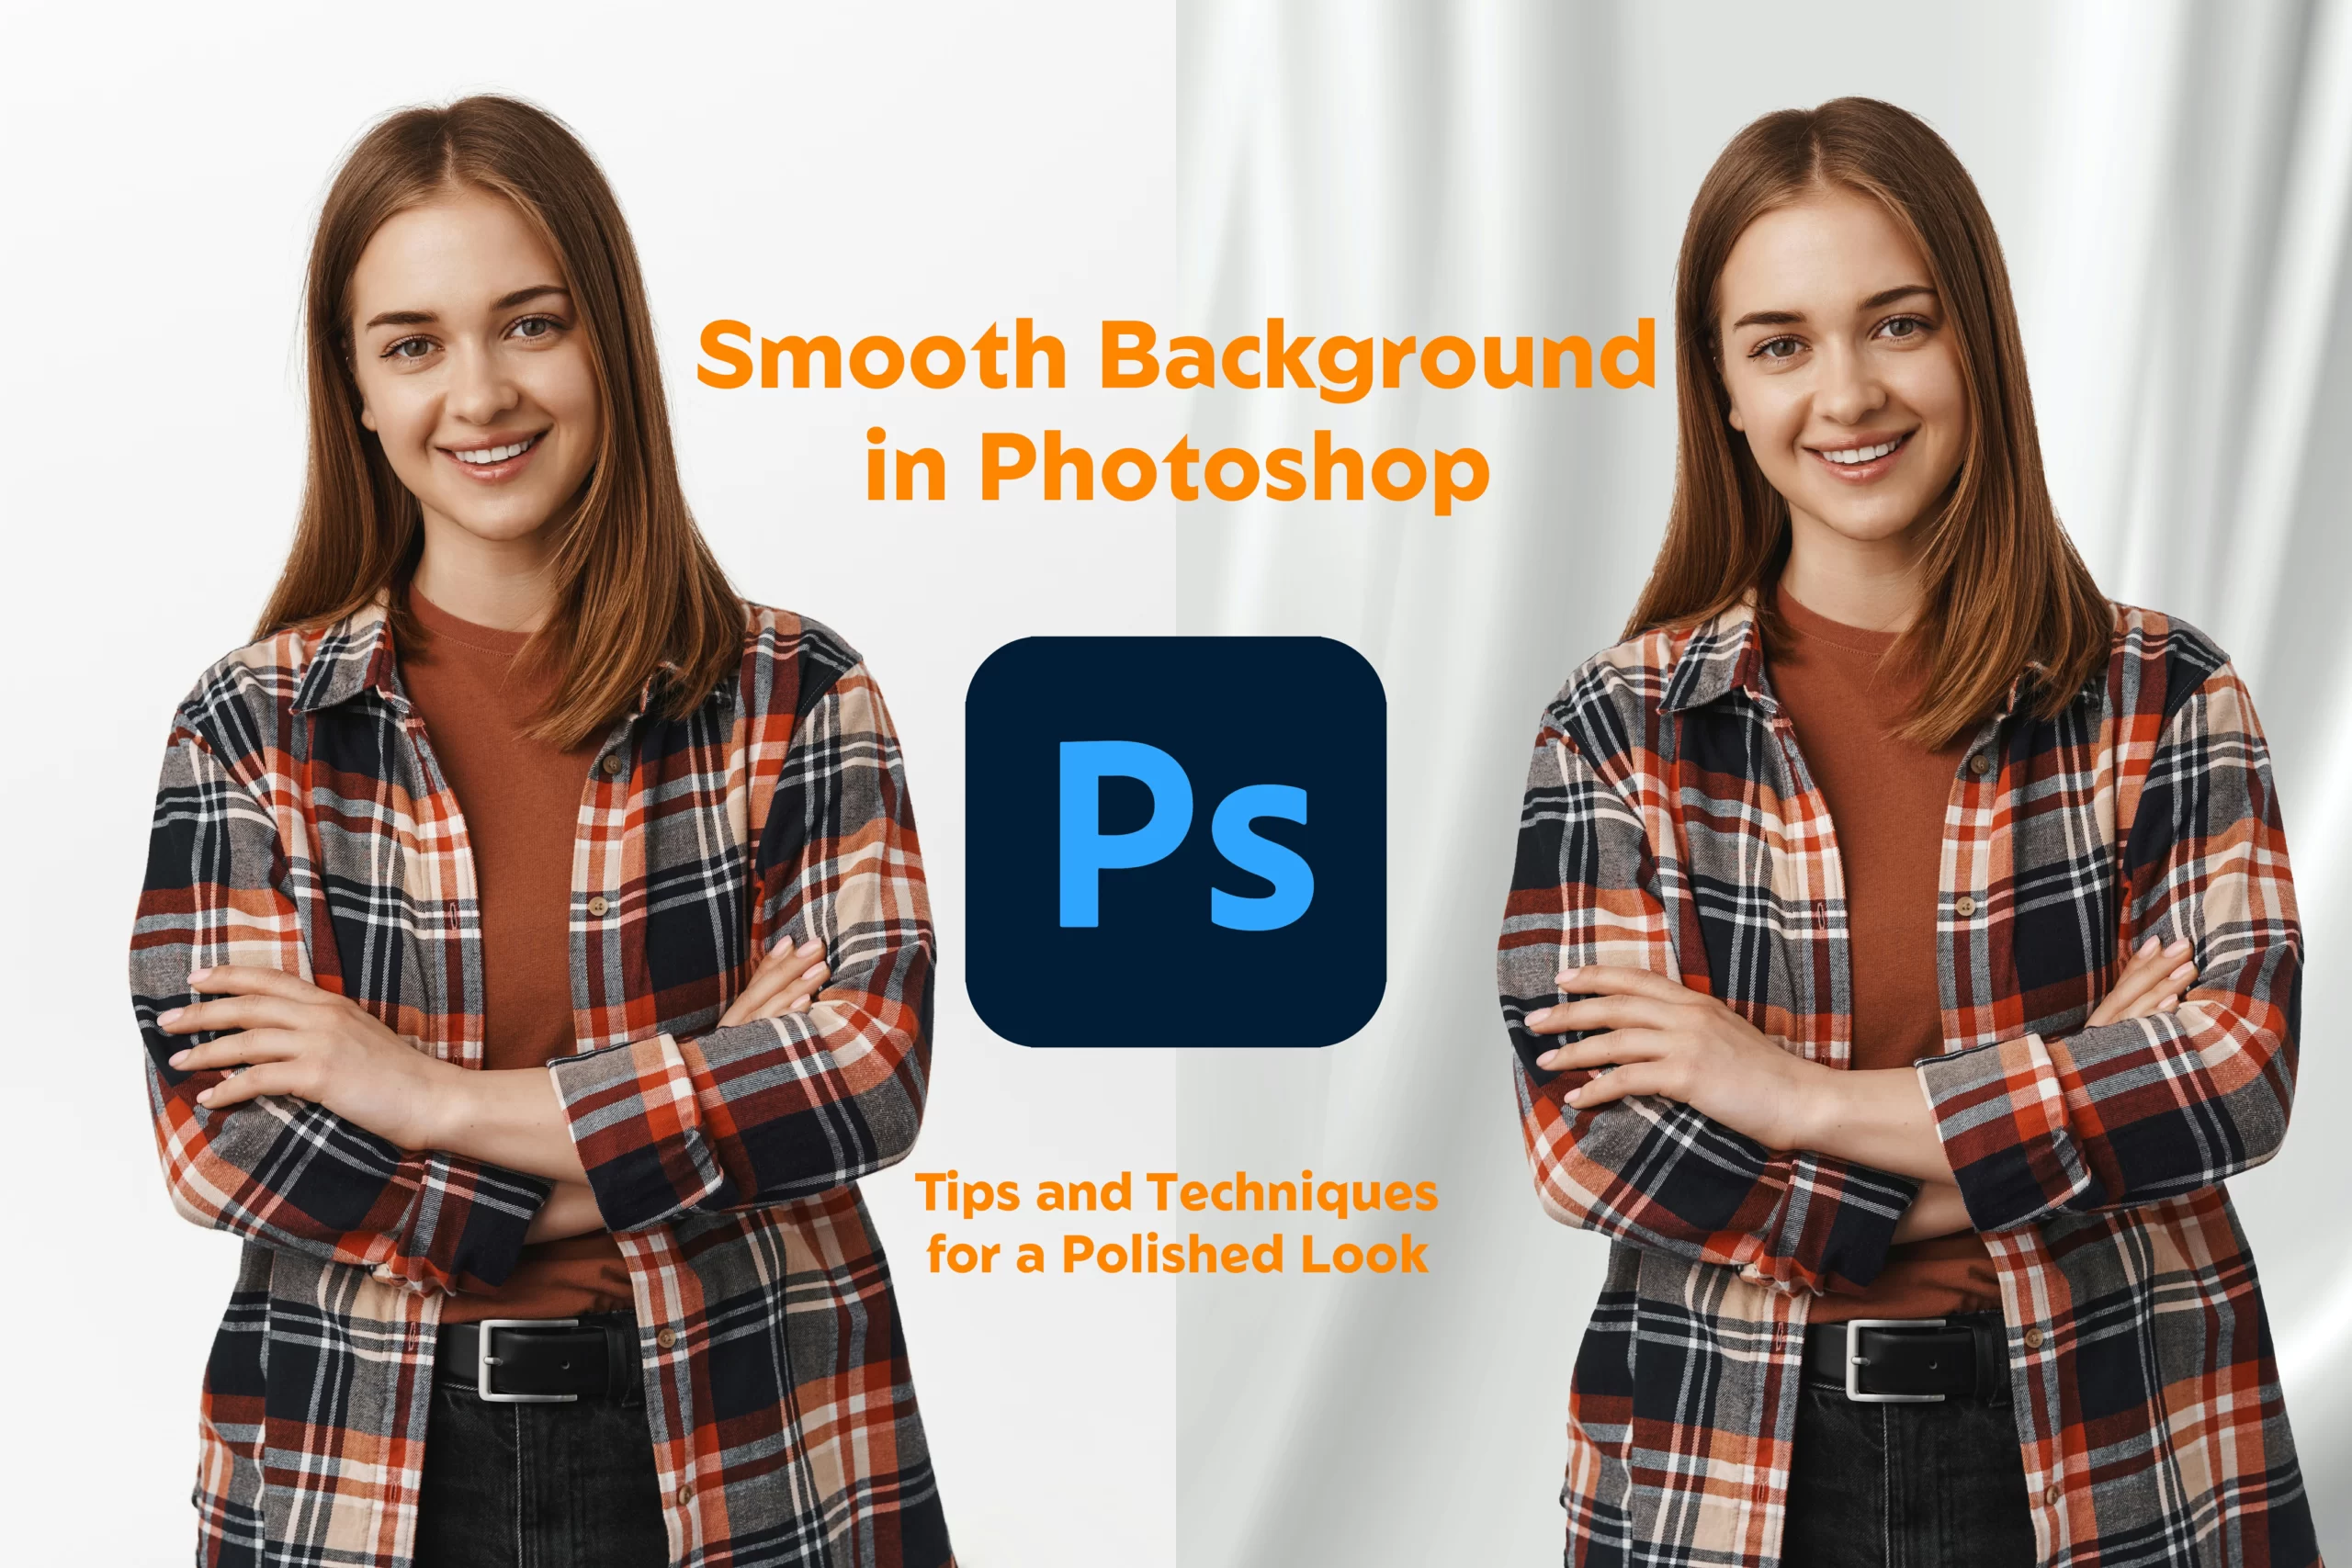 How to Smooth Background in Photoshop: Tips and Techniques for a Polished Look